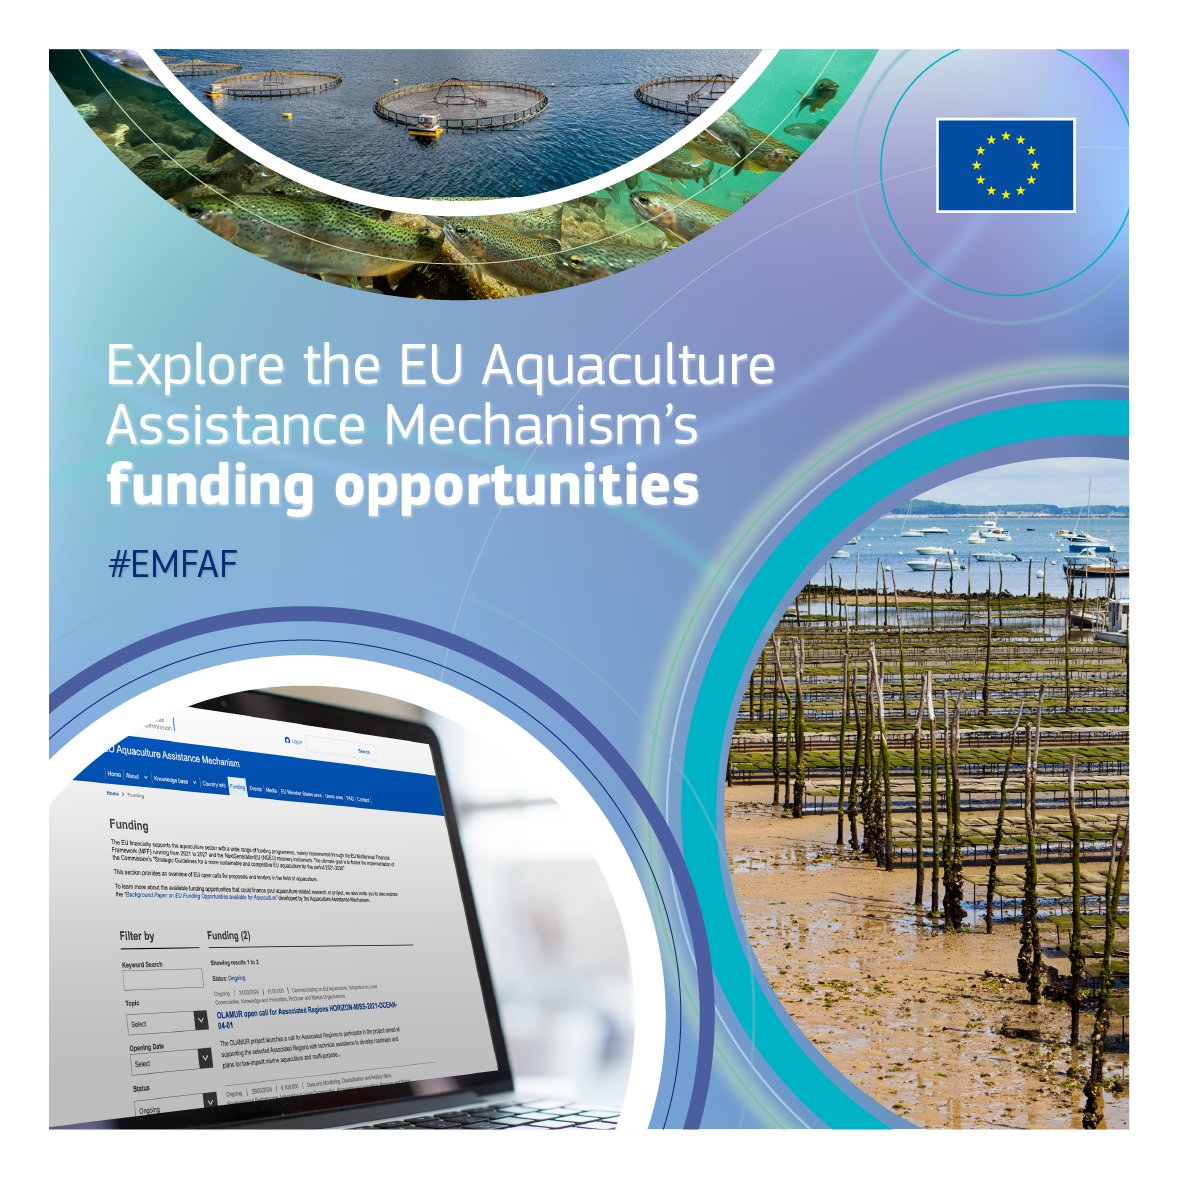 Have an overview of EU open calls for proposals & tenders in the field of aquaculture with just one click! 💶 There is a wide range of funding opportunities that could finance your aquaculture-related research or project👇 europa.eu/!tB7t7V #EMFAF #BlueFarmingEU